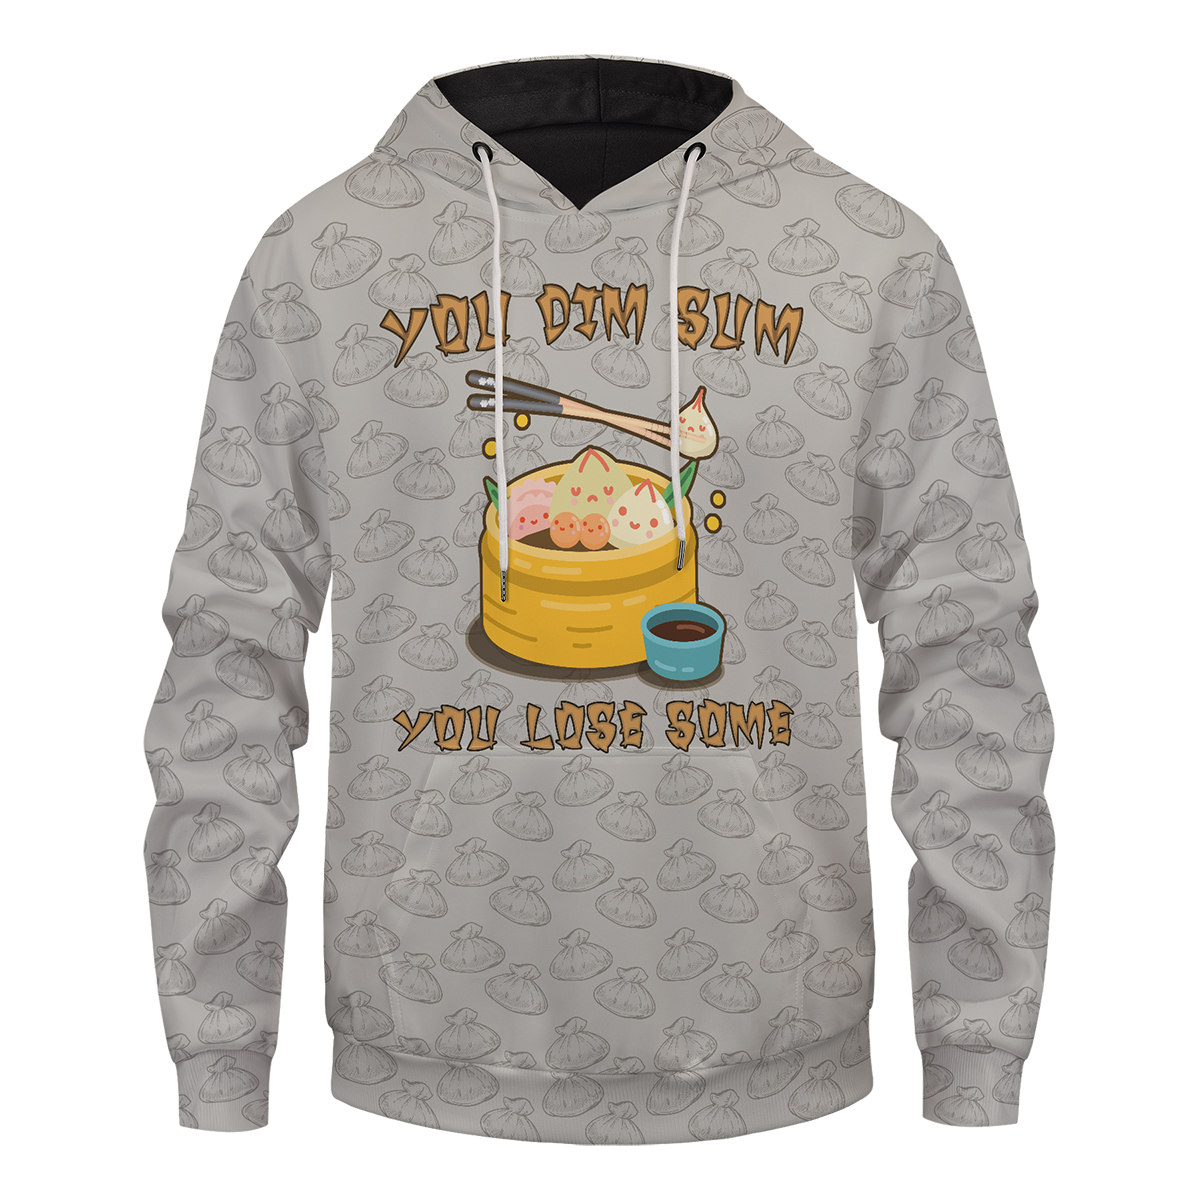 You Dim sum you Lose some Unisex Pullover Hoodie